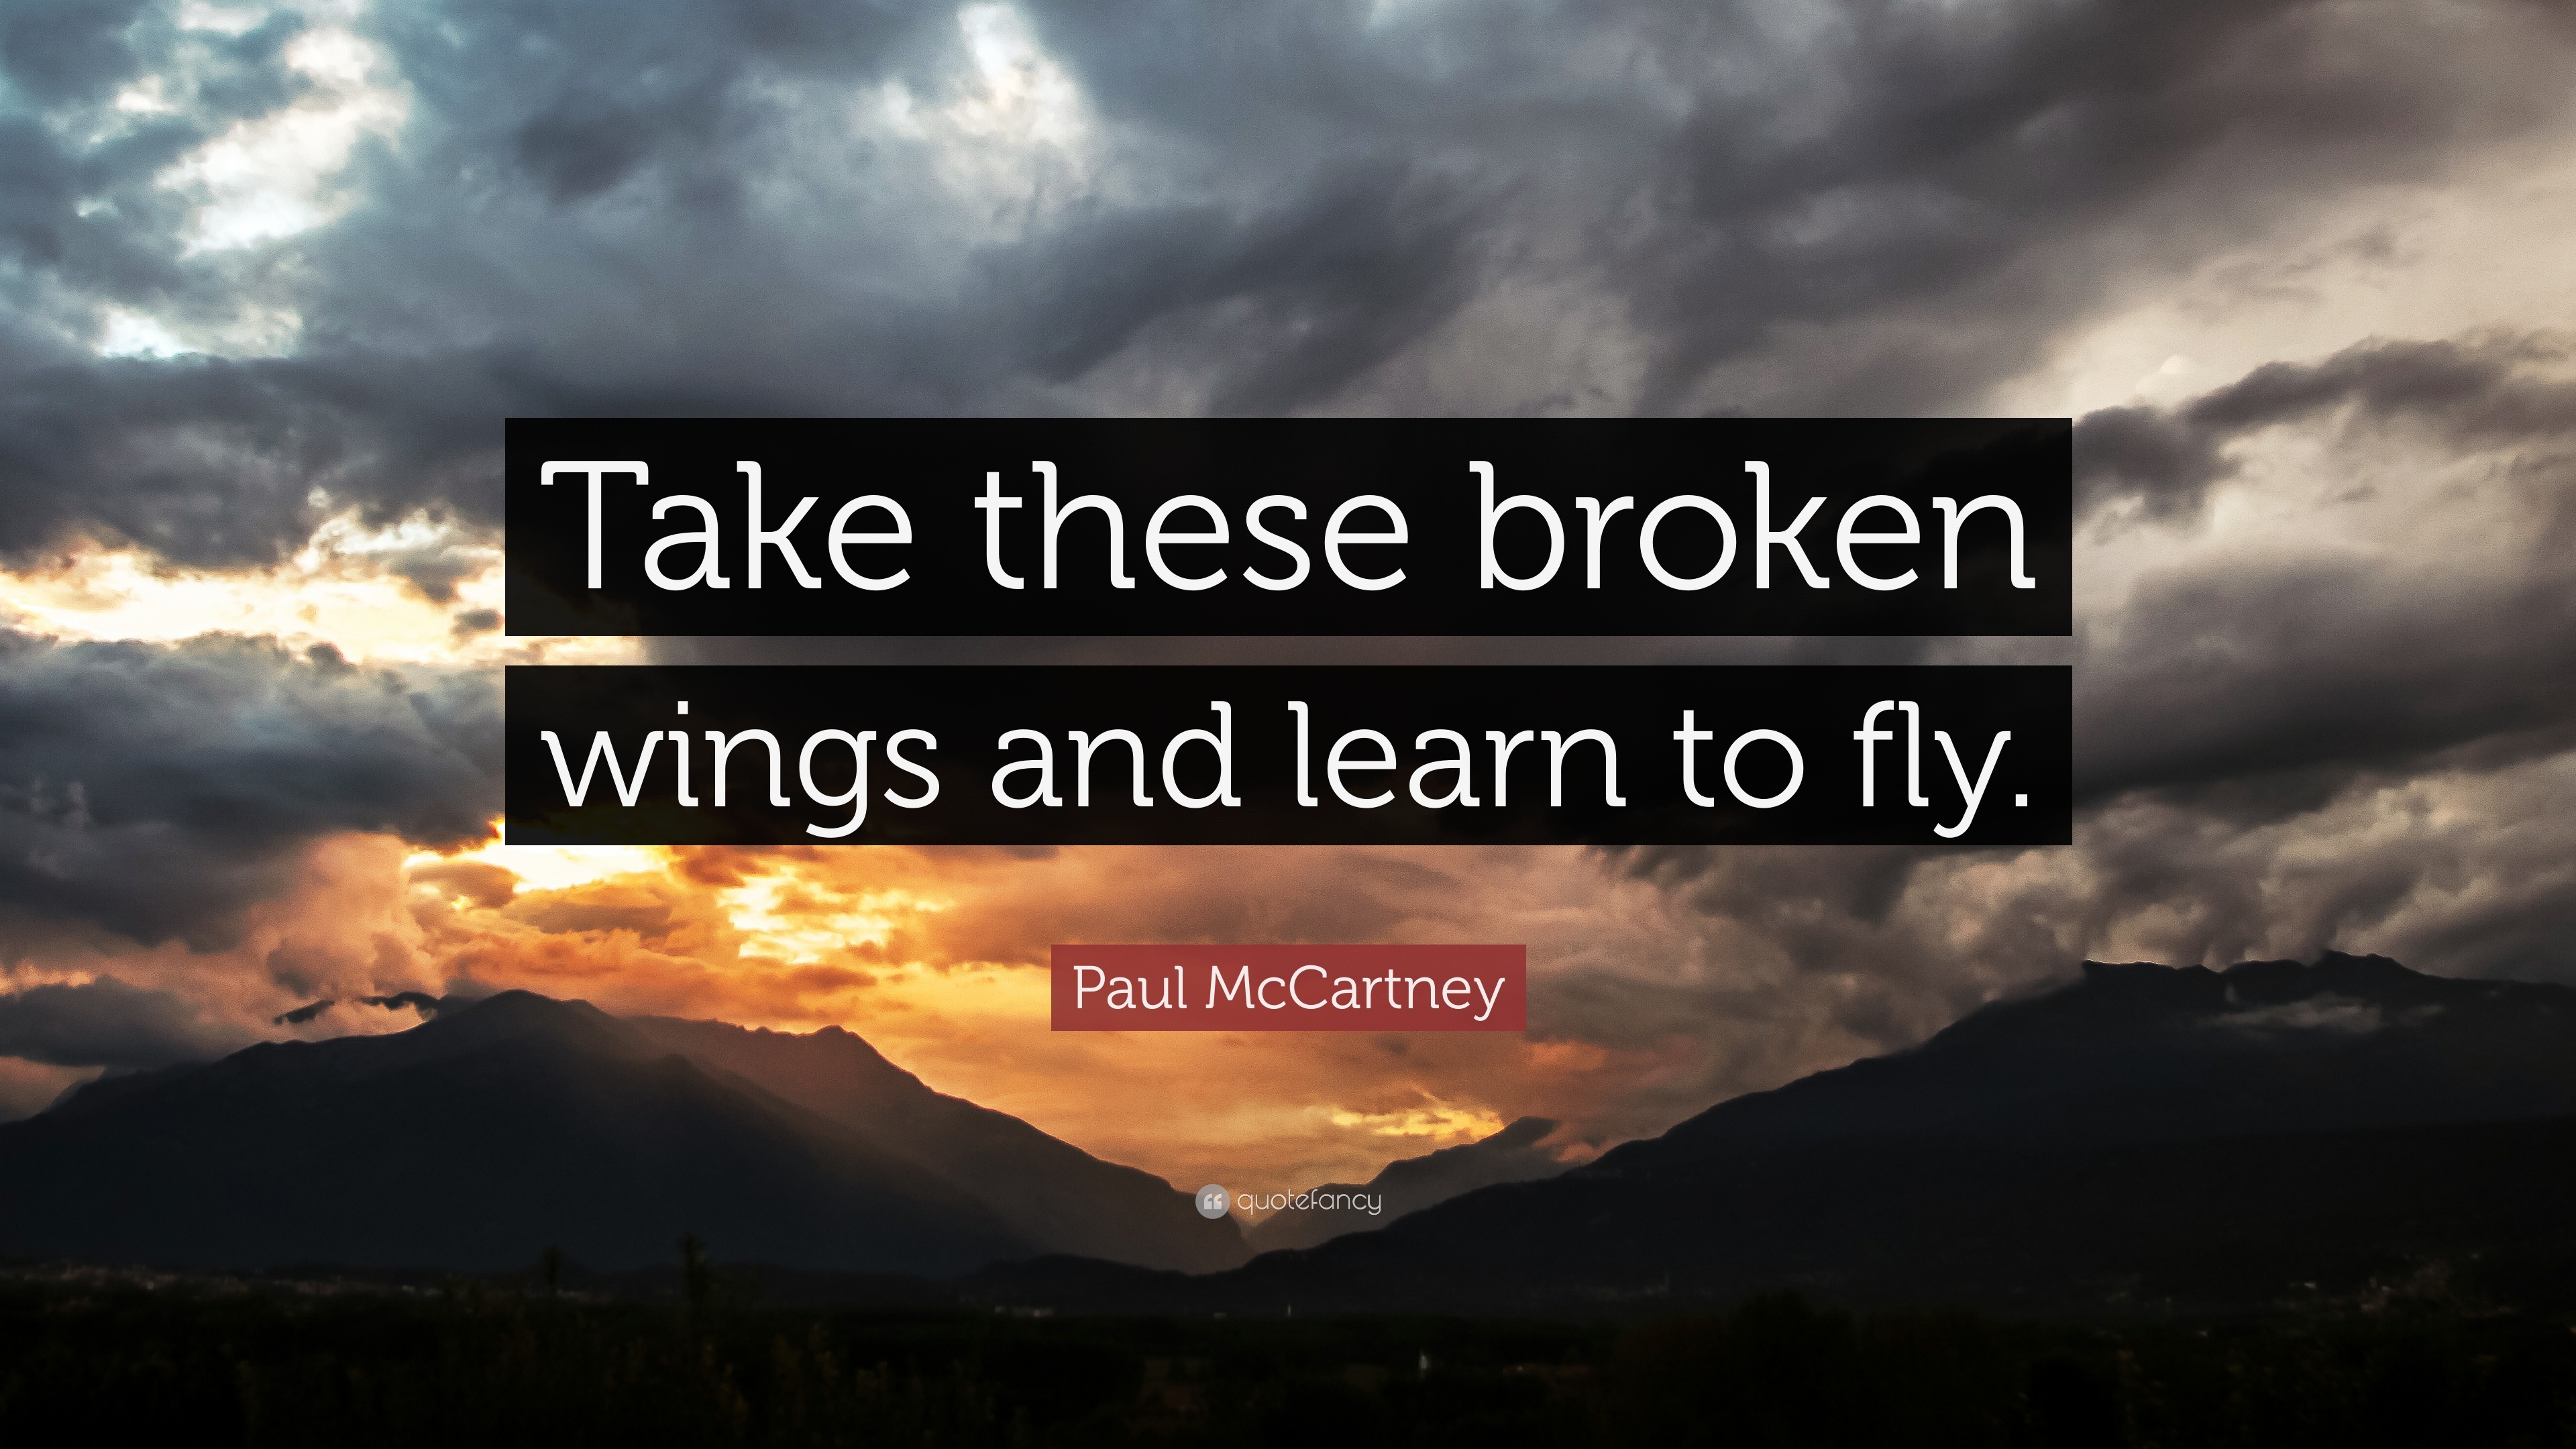 Paul McCartney Quote: "Take these broken wings and learn ...